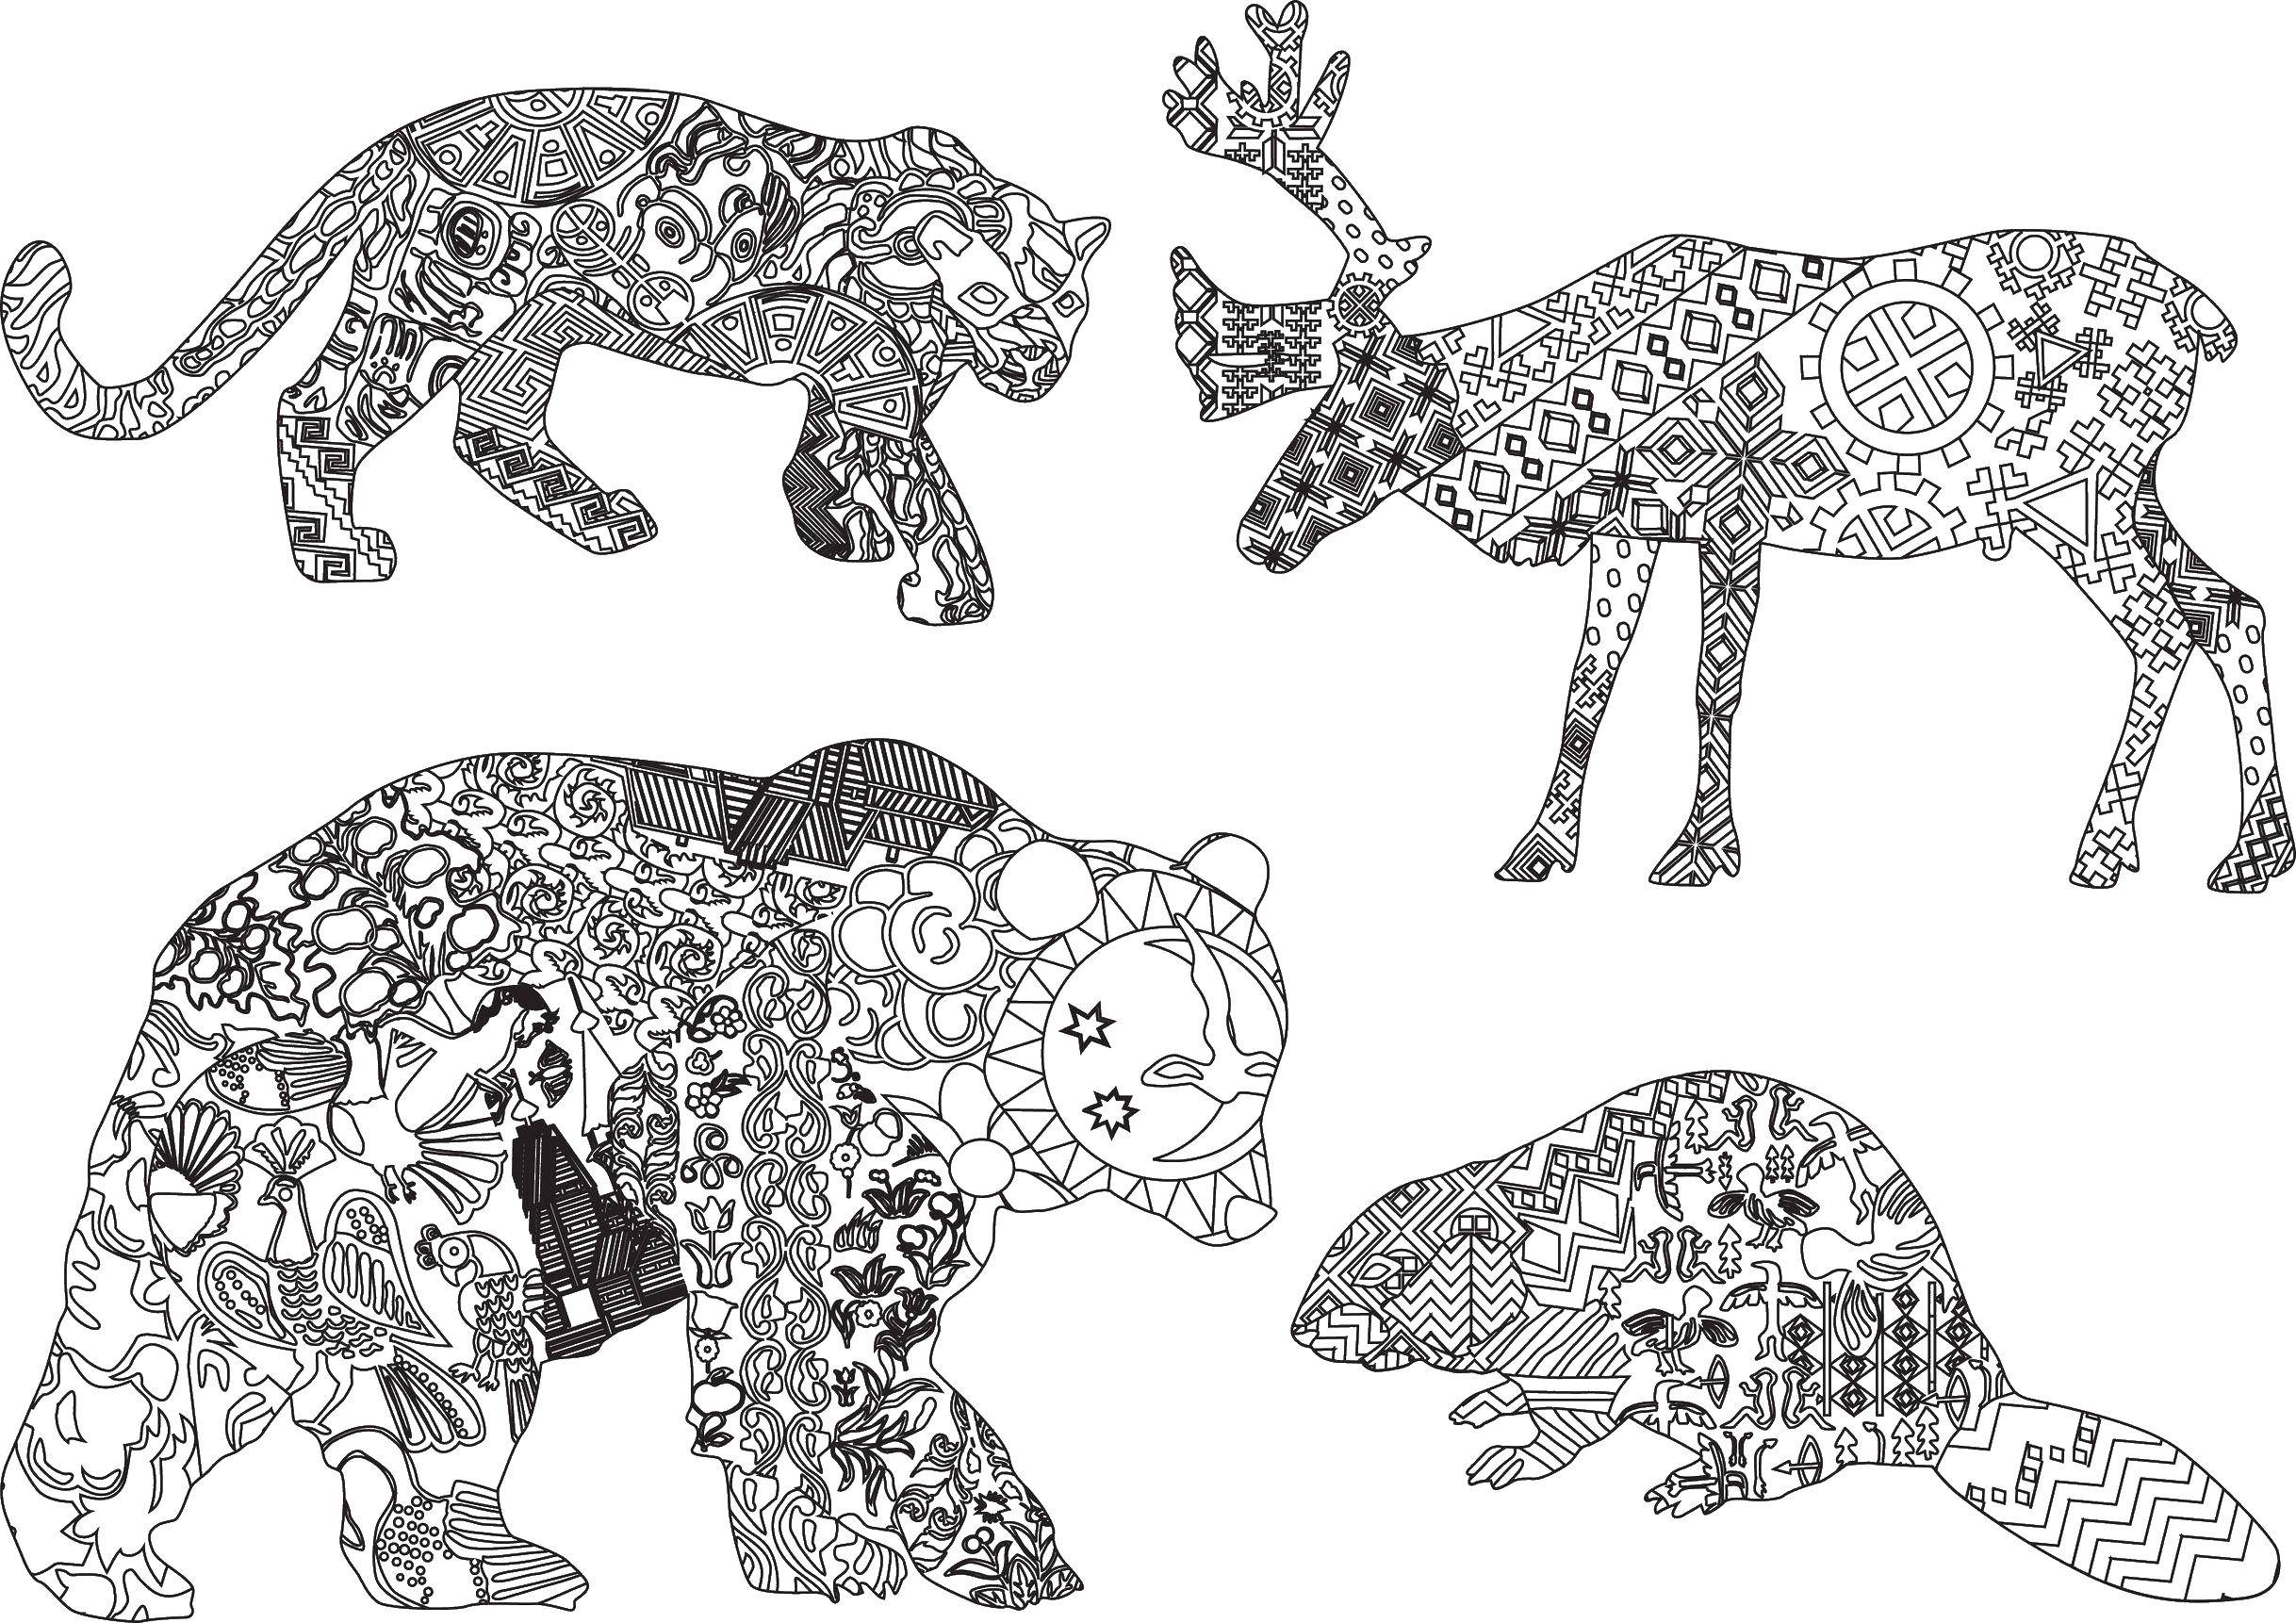 Coloring Animals patterned. Category coloring antistress. Tags:  animals, patterns.